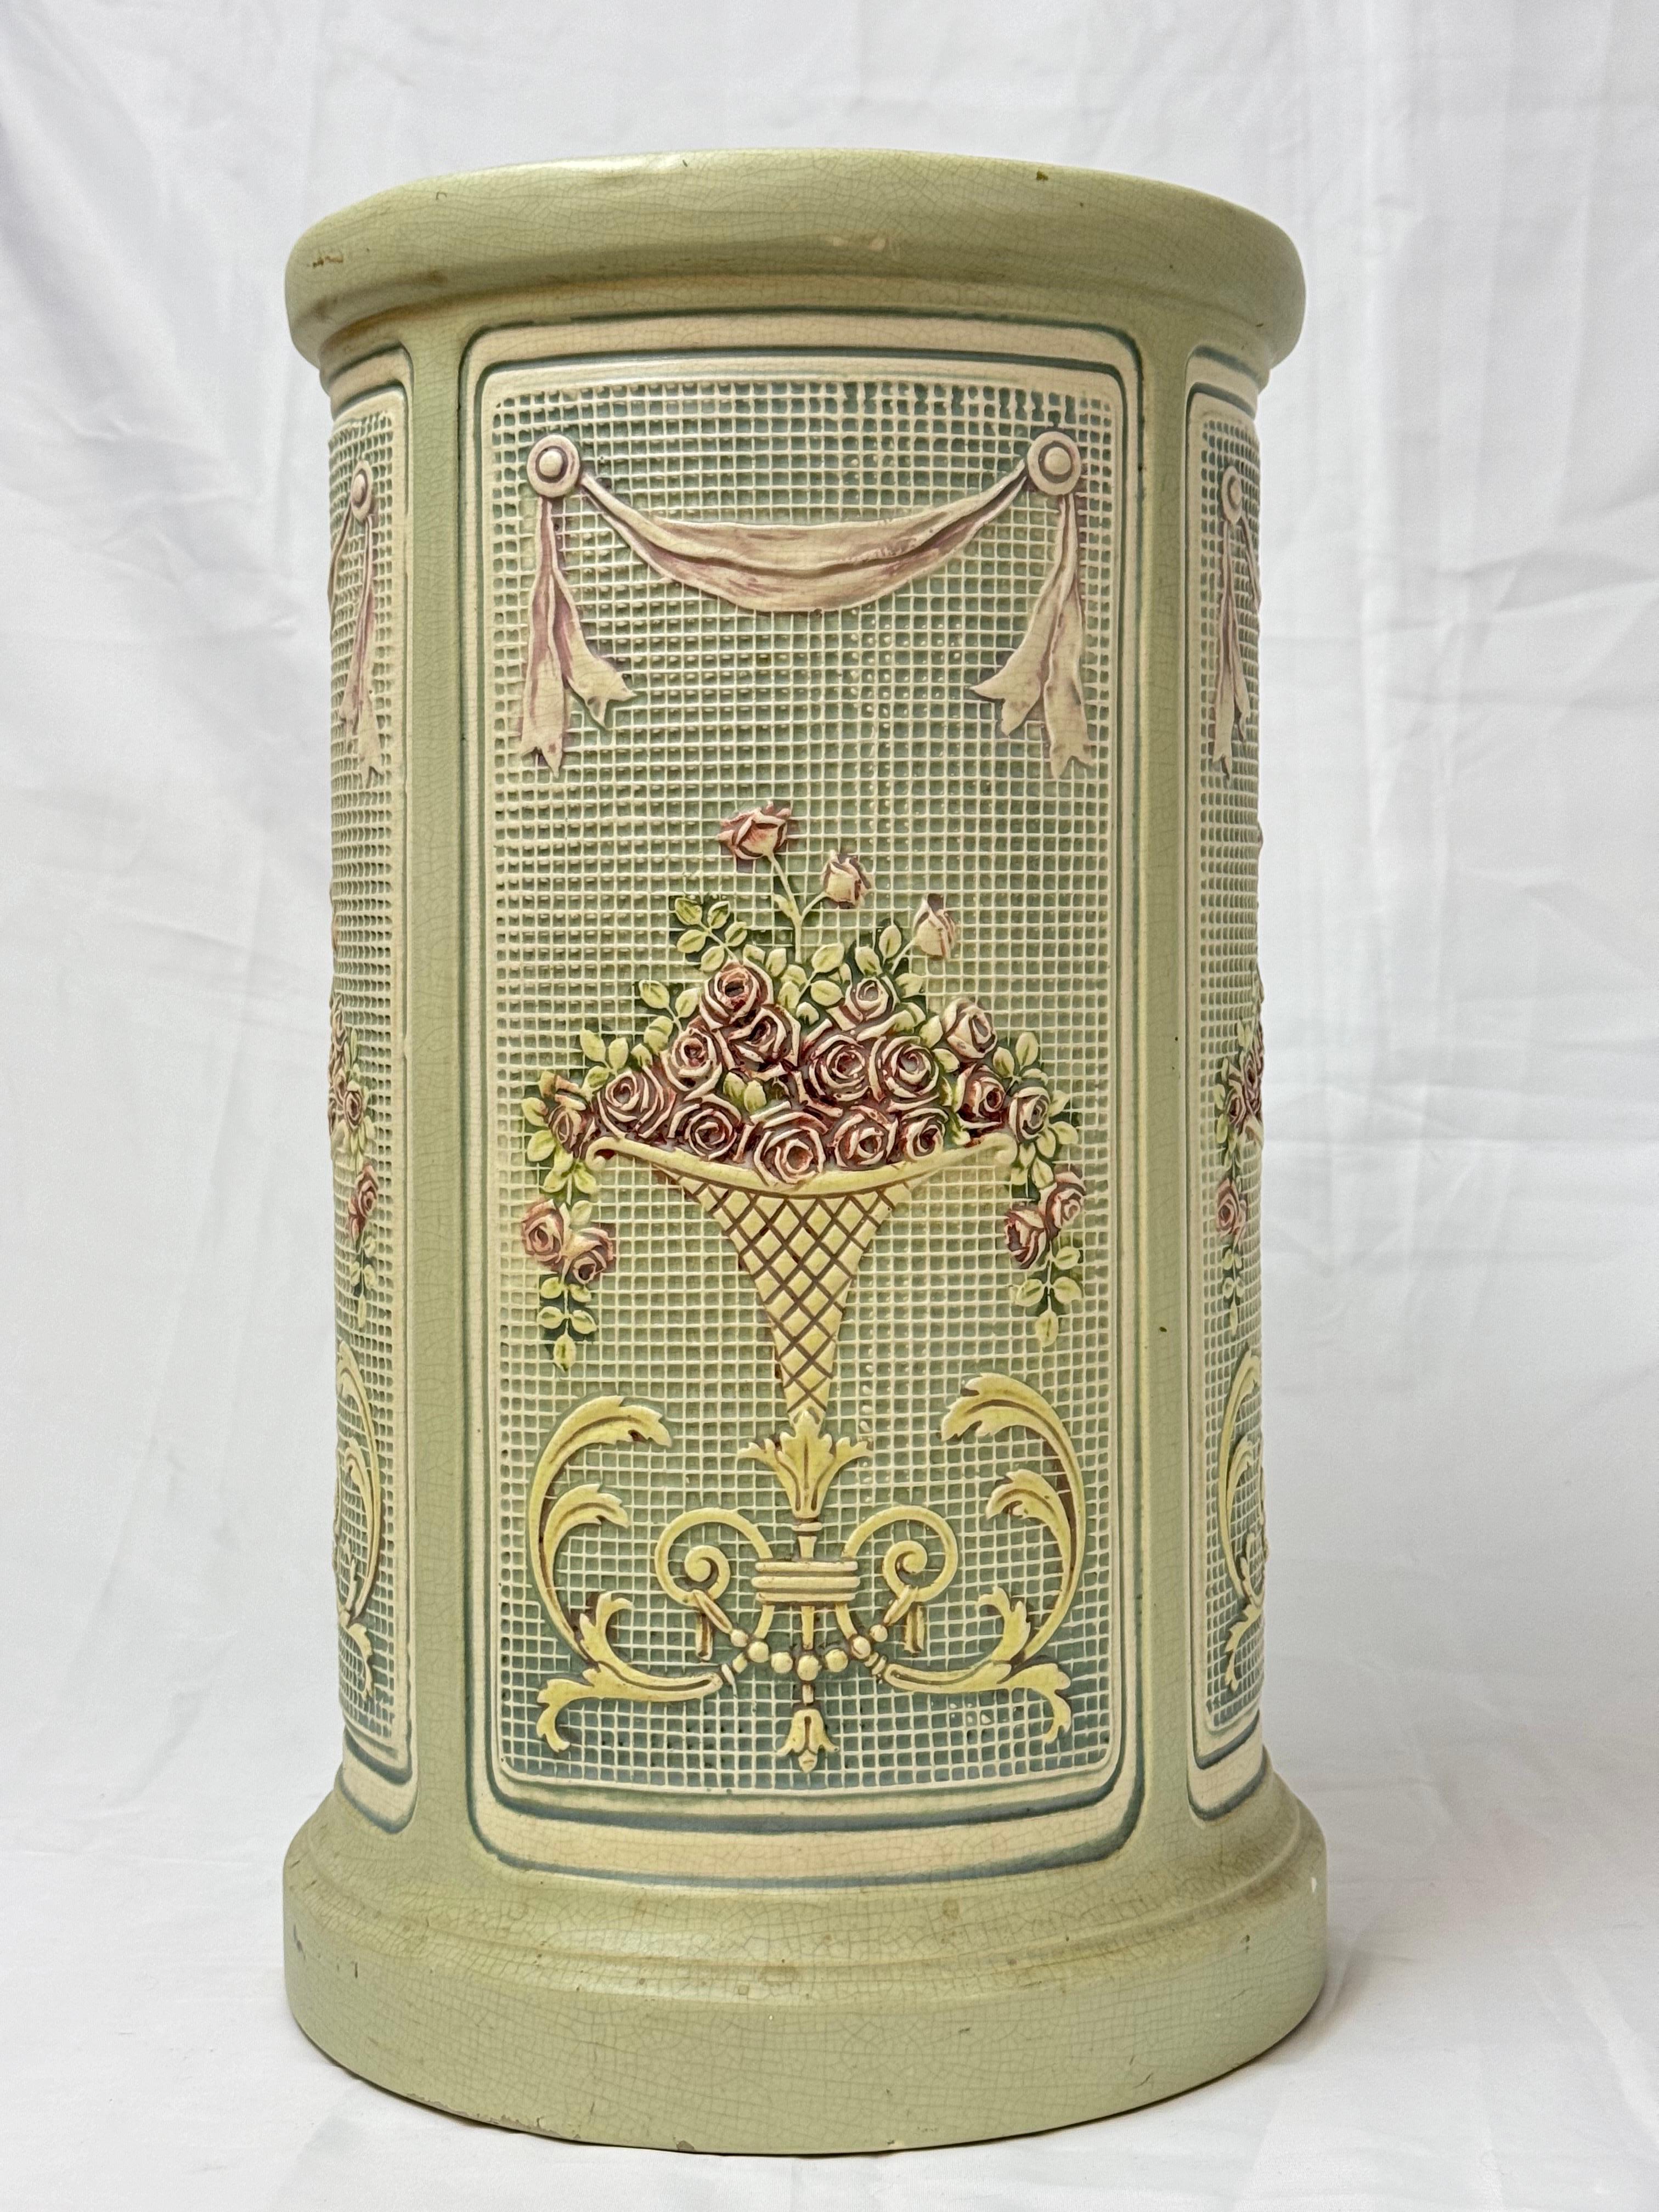 Rare and Collectible Weller Dupont Jardiniere circa 1930's . Romantic overflowing bouquet of roses with ribbons across a green and cream graph like background with a neoclassical design. Very hard to find. In very good condition. 